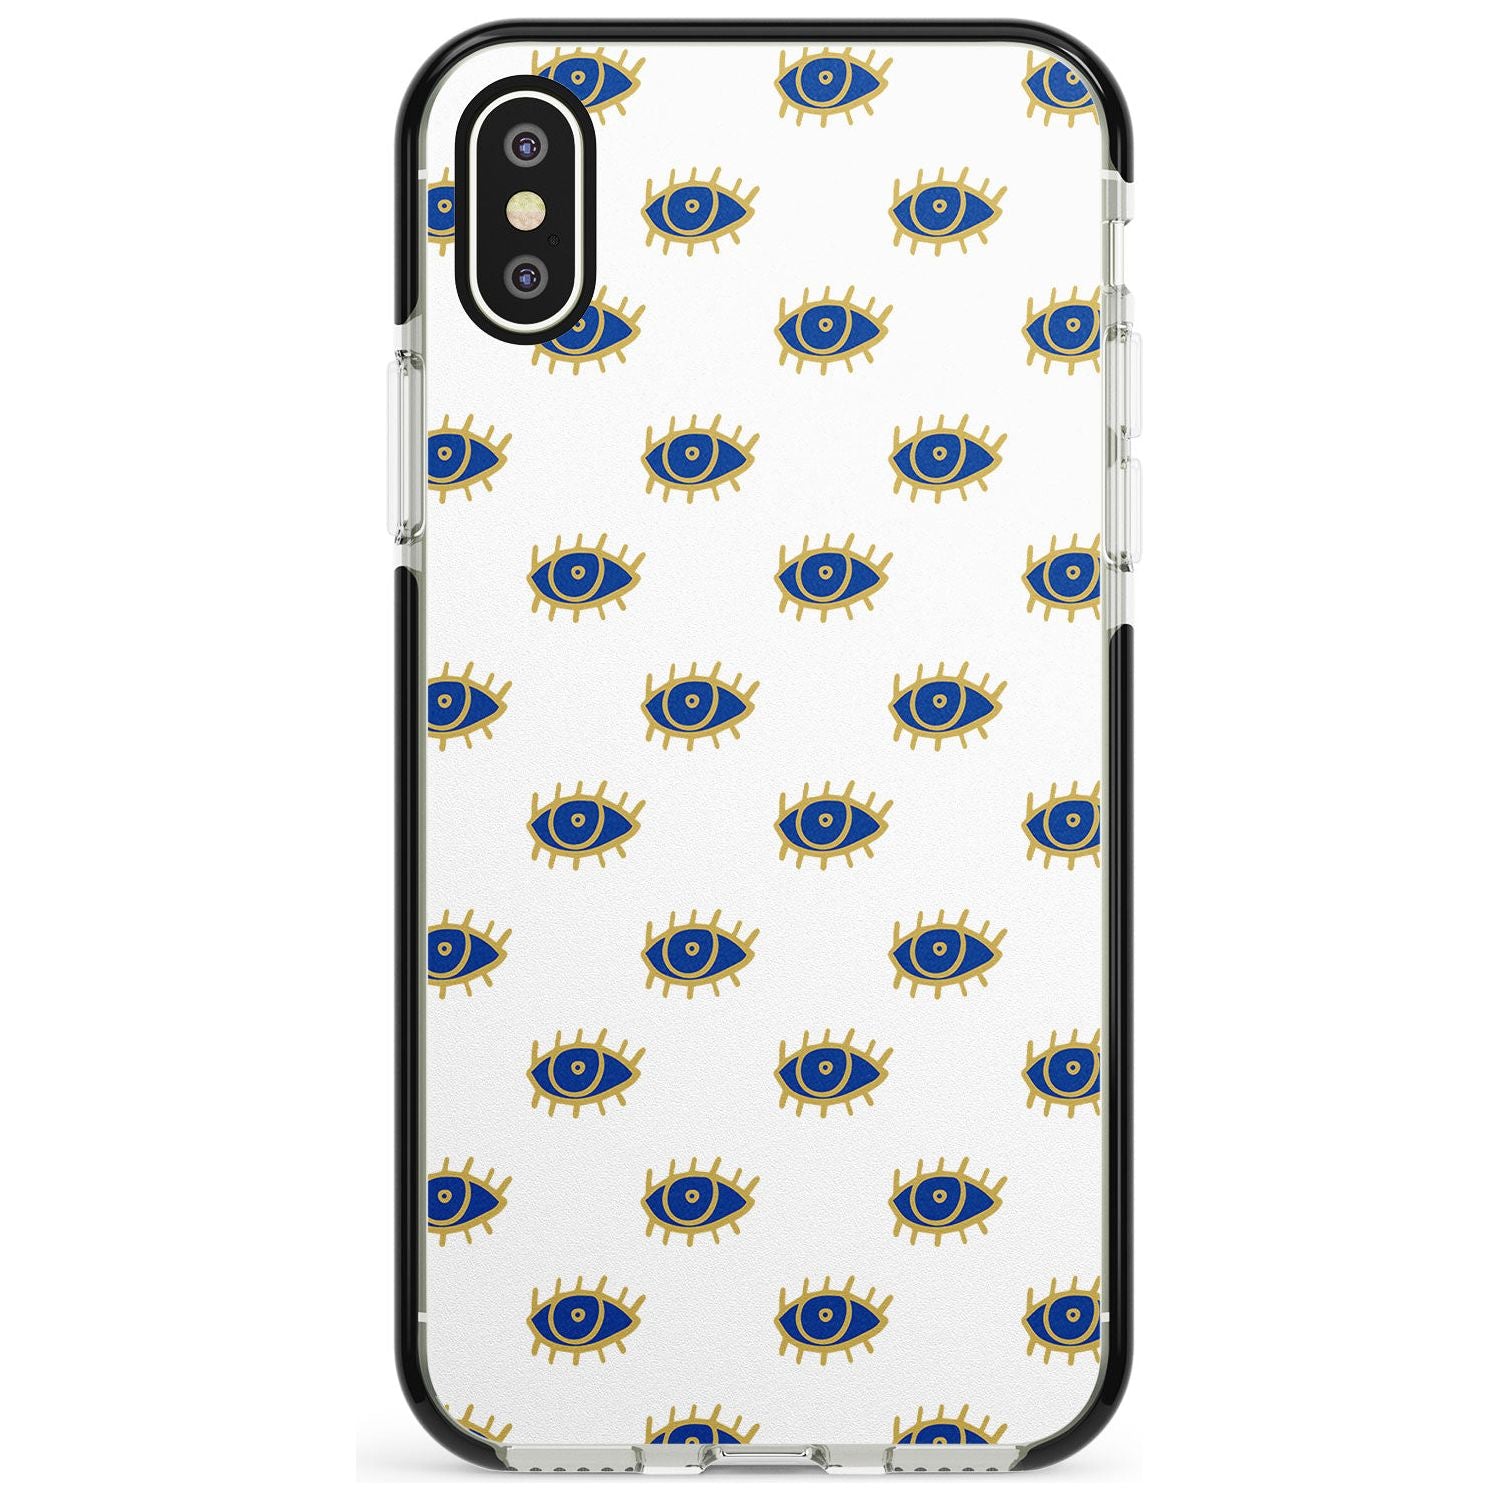 Gold Eyes Psychedelic Eyes Pattern Black Impact Phone Case for iPhone X XS Max XR